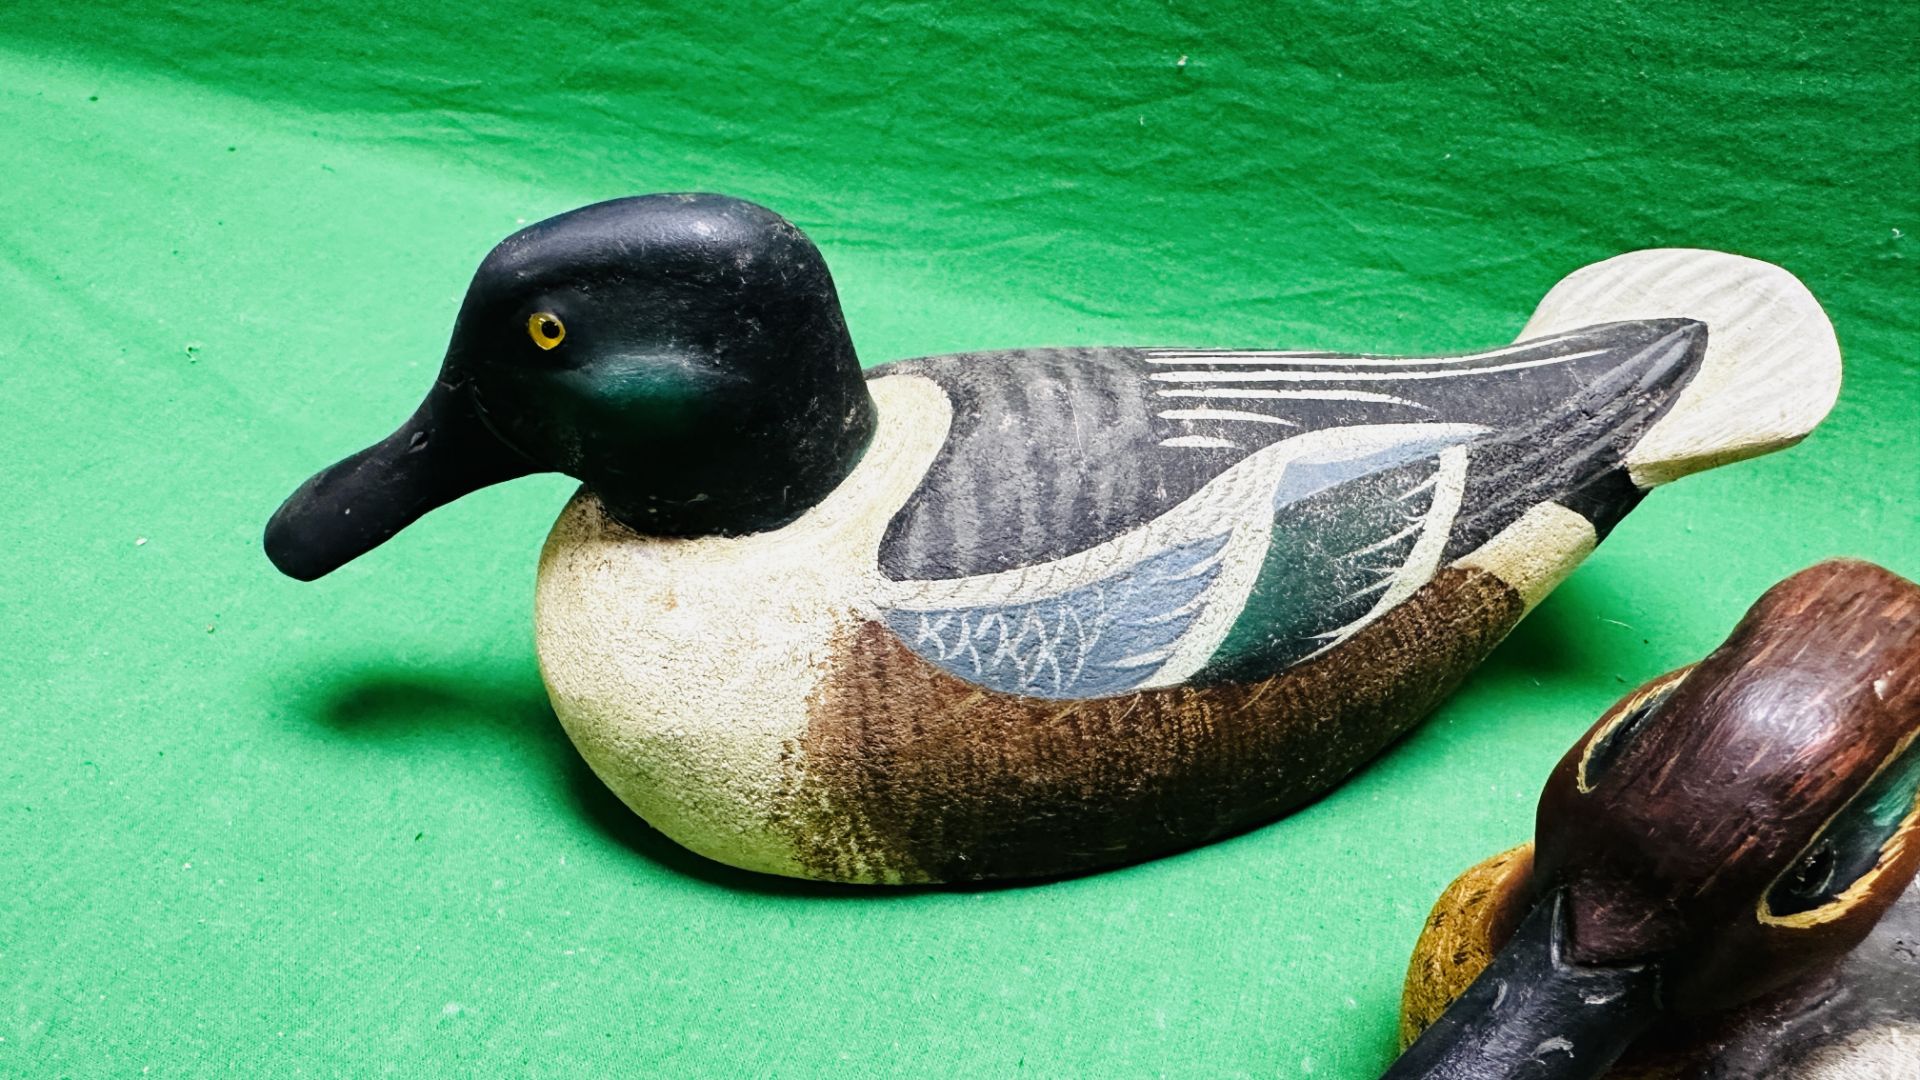 A HANDCRAFTED SET OF 4 DUCK DECOYS HAVING HANDPAINTED DETAIL AND GLASS EYES. - Image 5 of 13